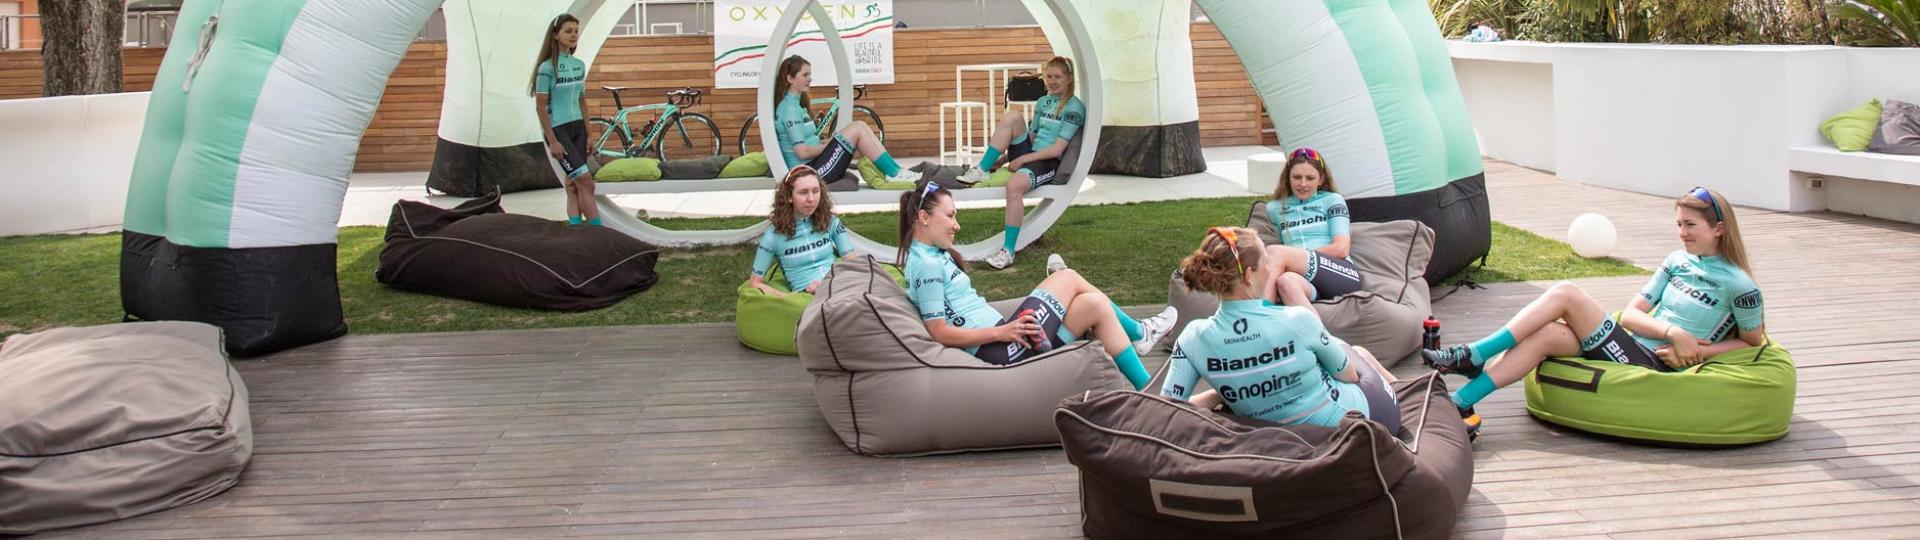 cycling.oxygenhotel en cycling-event-in-romagna 012